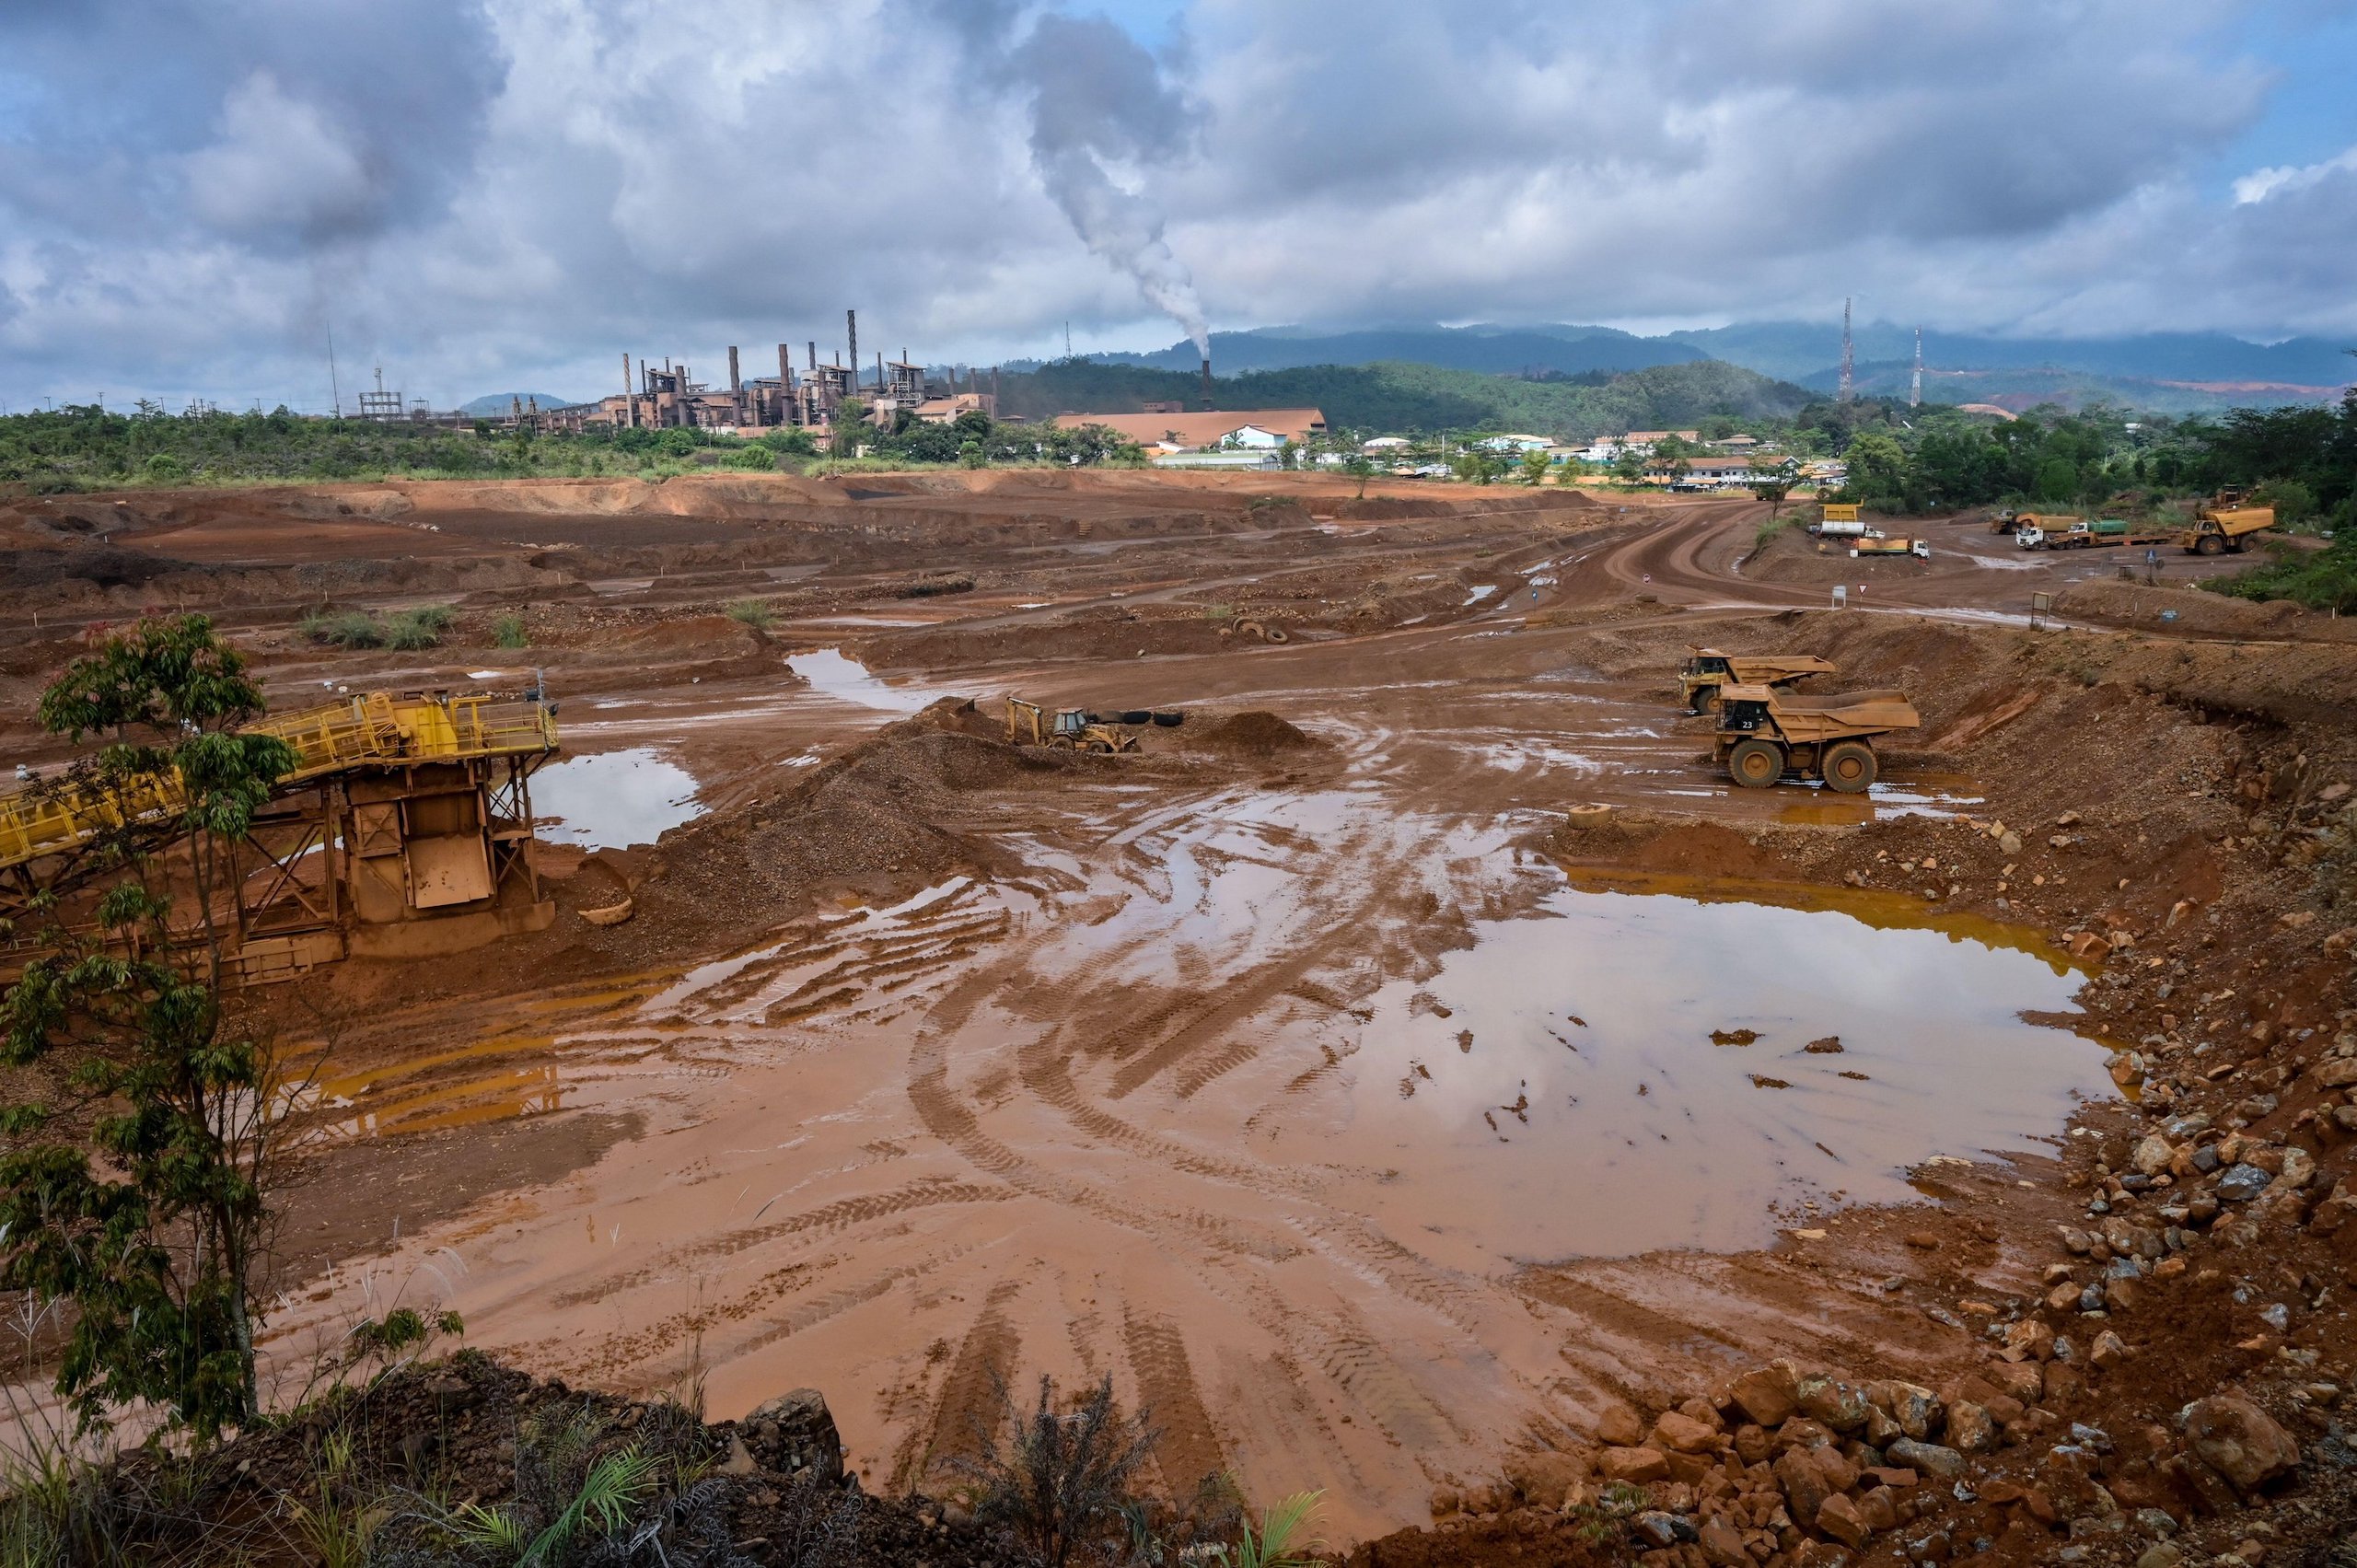  A nickel mine and processing plant in South Sulawesi, Indonesia_Hariandi Hafid